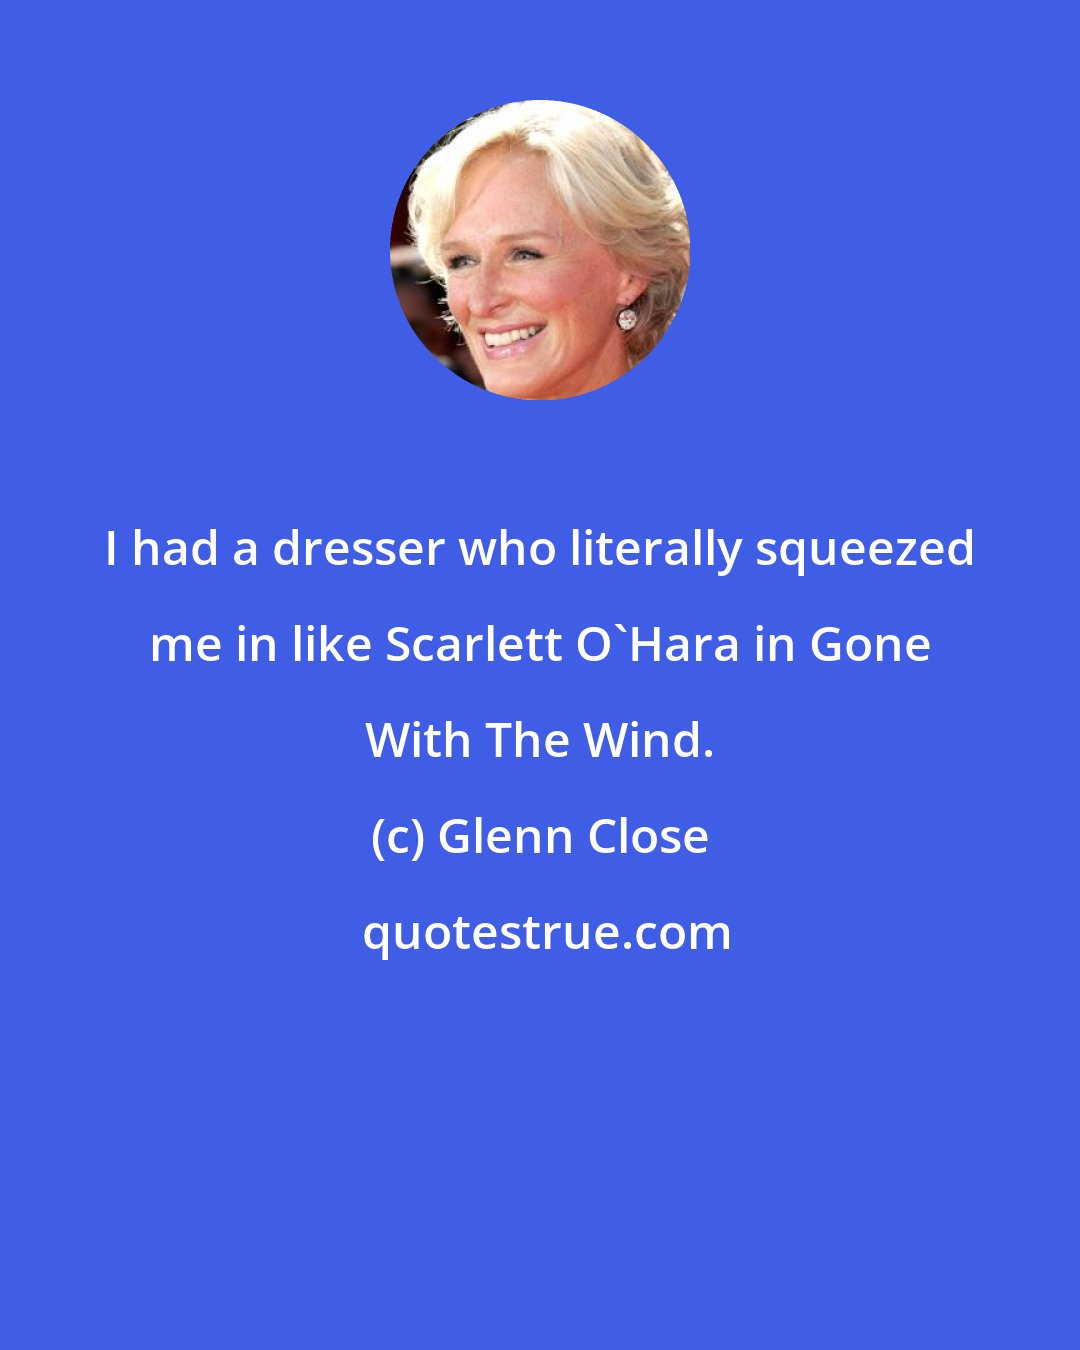 Glenn Close: I had a dresser who literally squeezed me in like Scarlett O'Hara in Gone With The Wind.